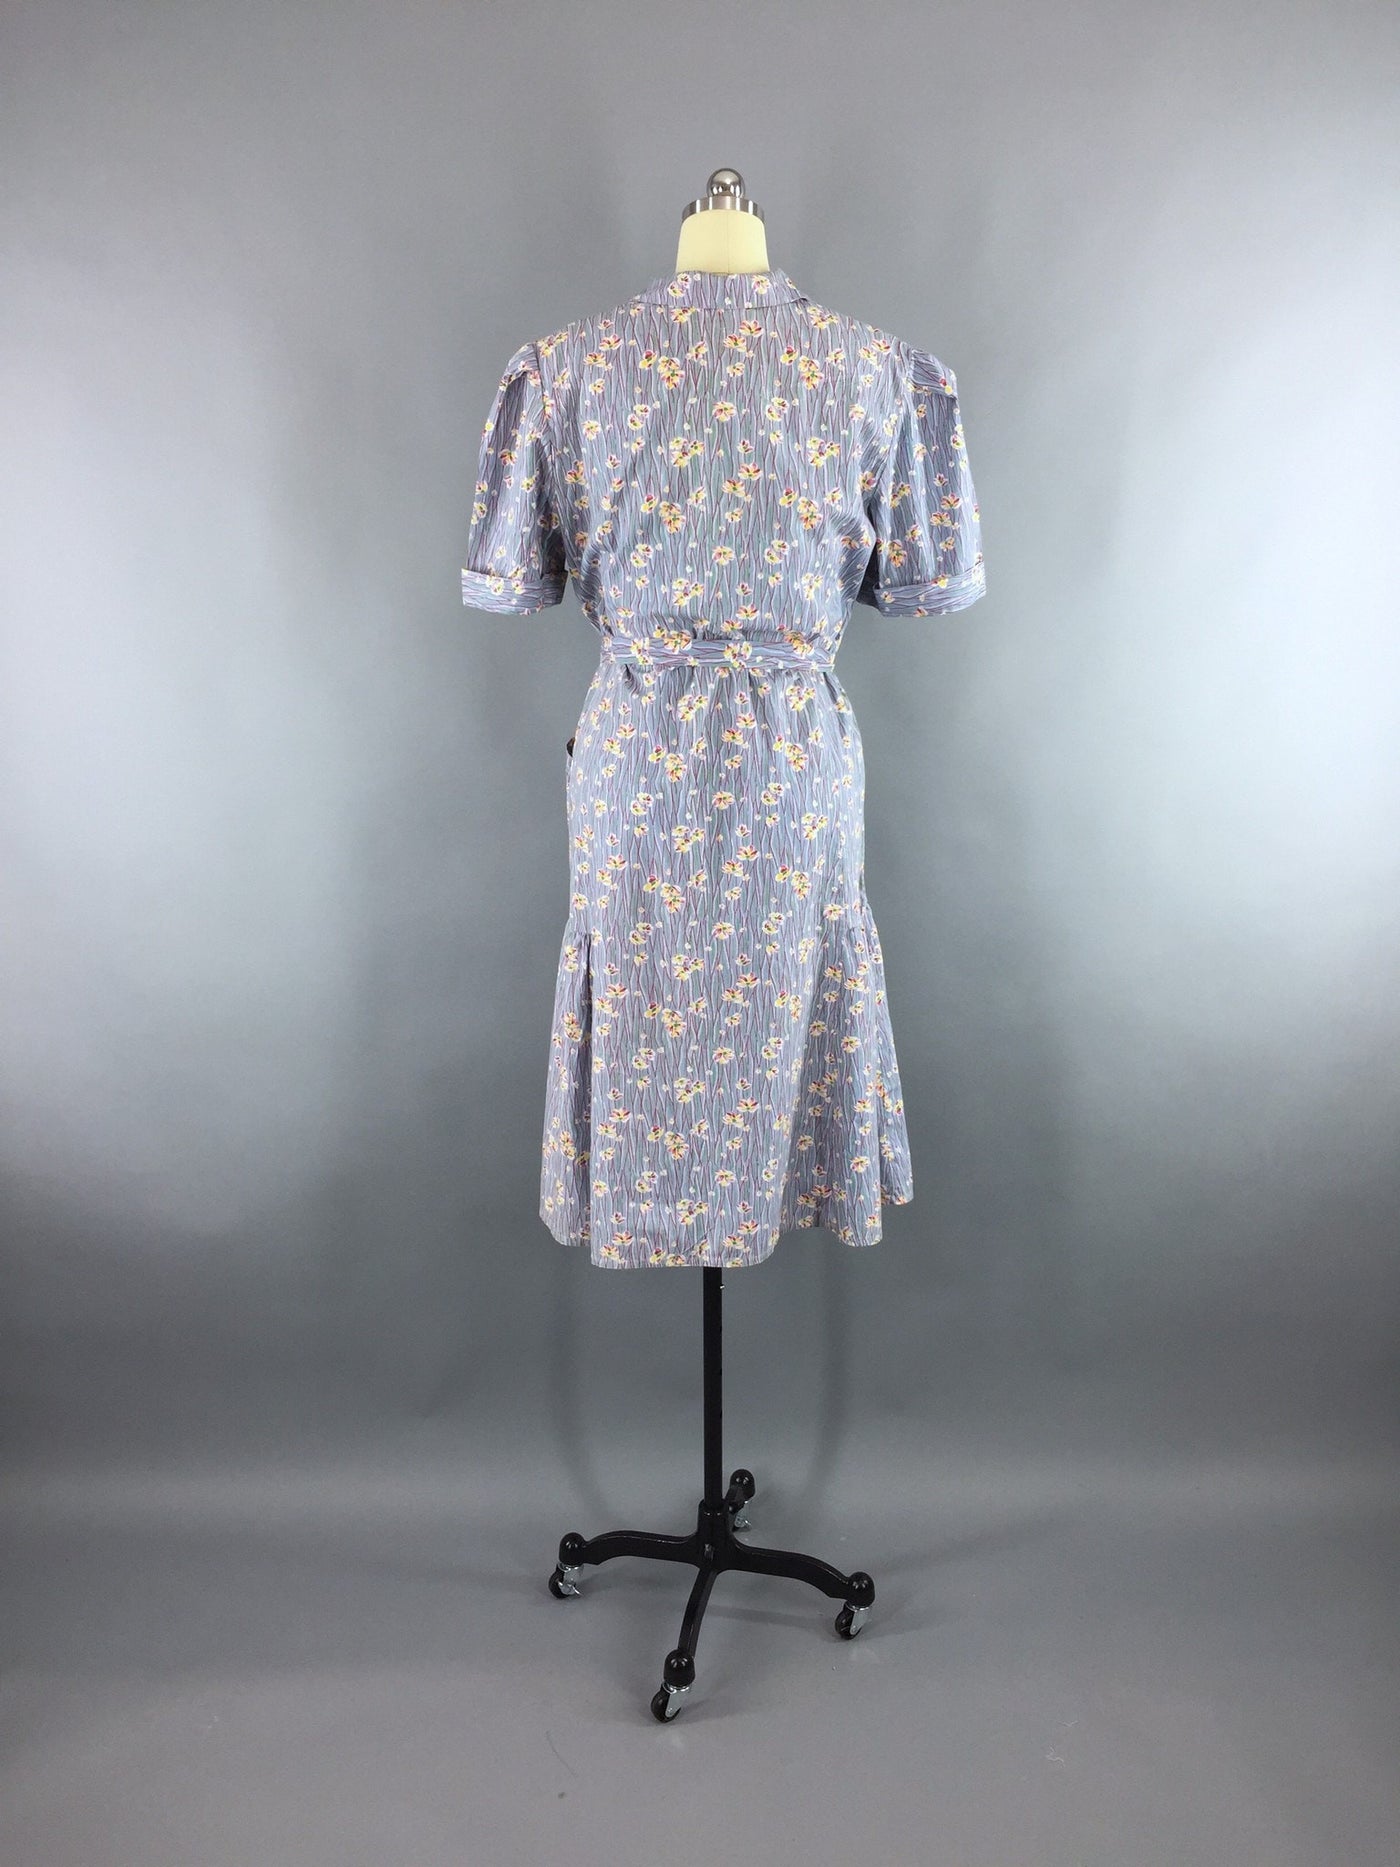 Vintage 1980s Day Dress / 20s Style Drop Waist Floral Print - ThisBlueBird